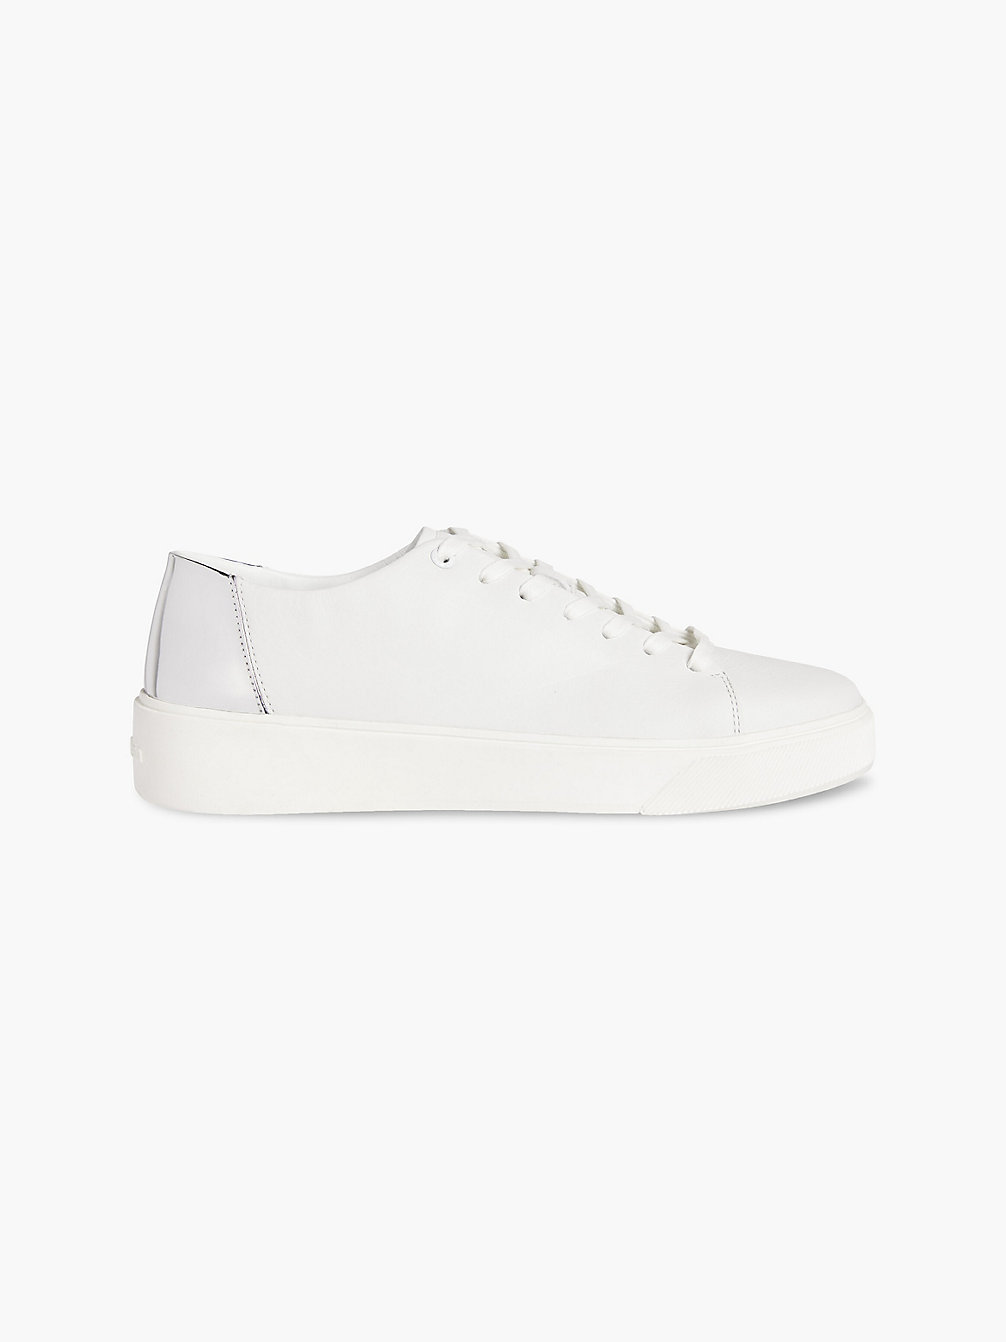 WHITE/SILVER Leather Trainers undefined men Calvin Klein